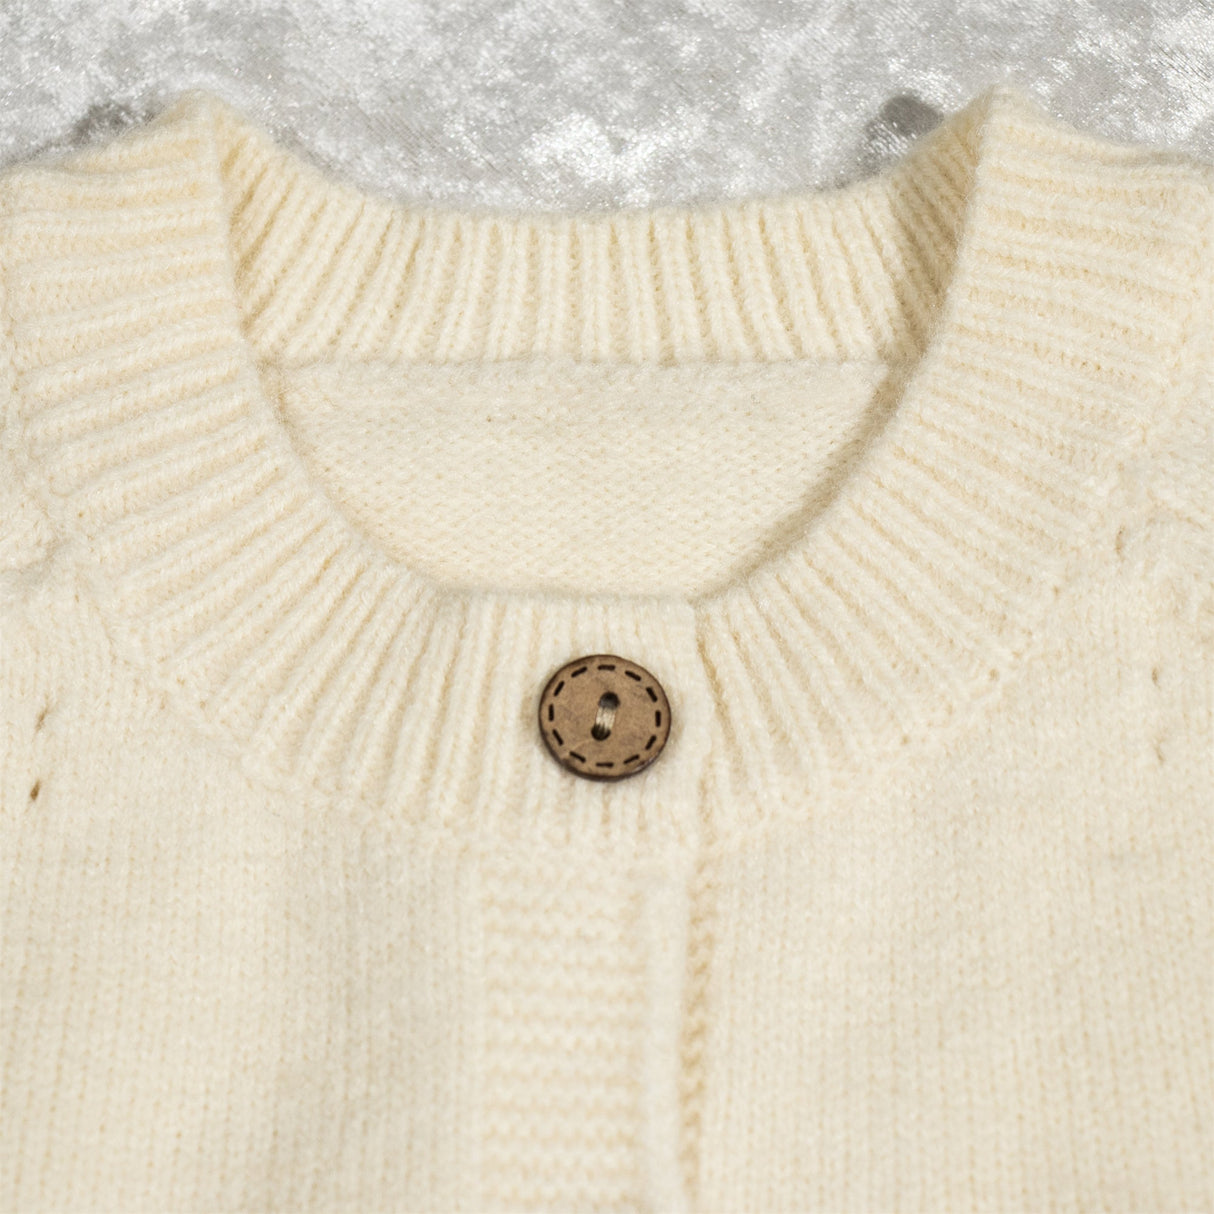 GEX Personalized Sweater Cardigan Kids with Name for Newborn Gift - GexWorldwide